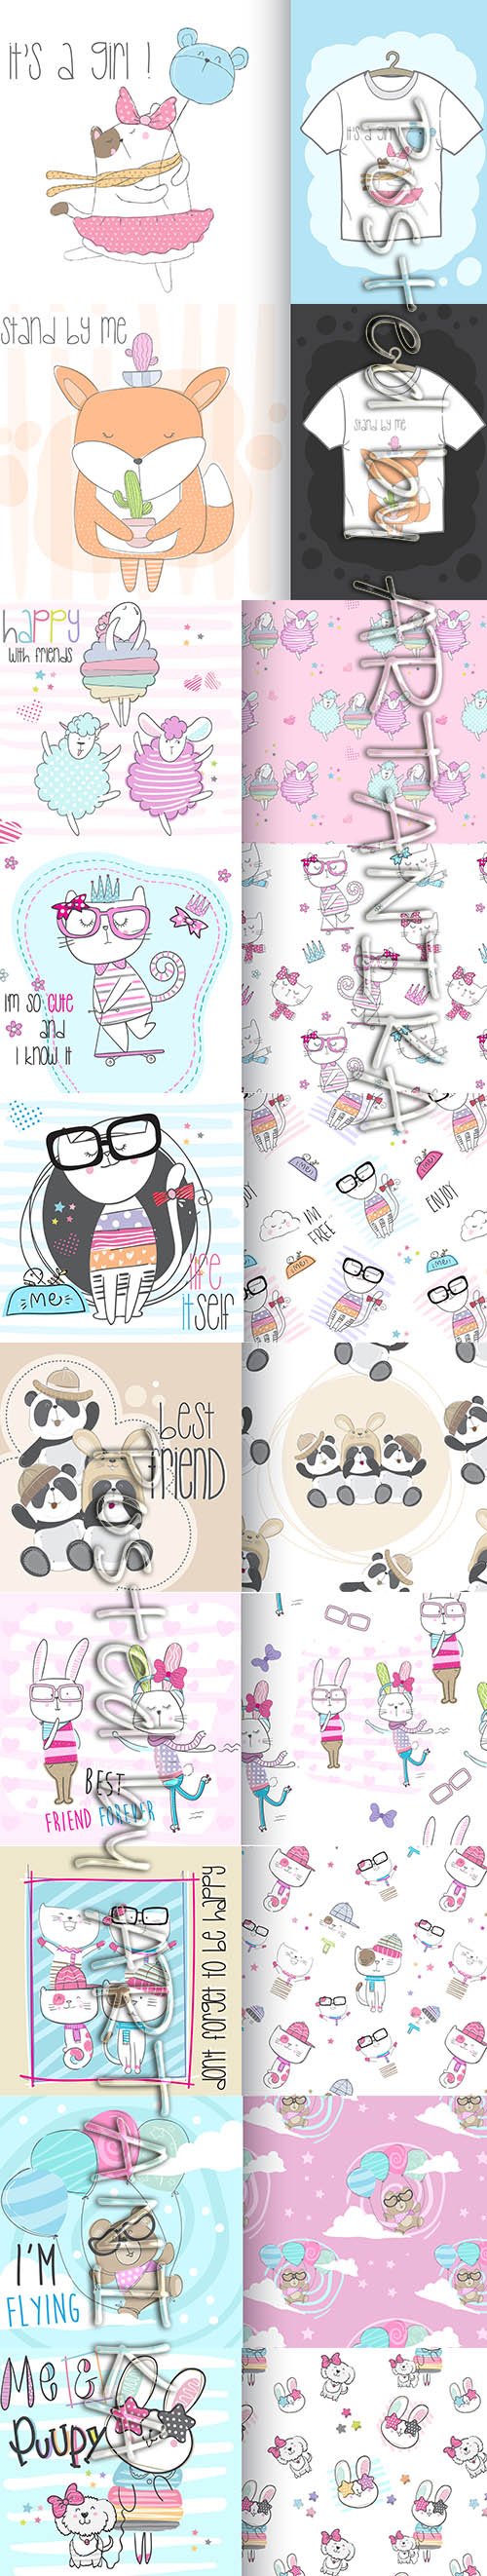 Cute Little Animals and Child Illustrations with Seamless Pattern Pack Vol 8